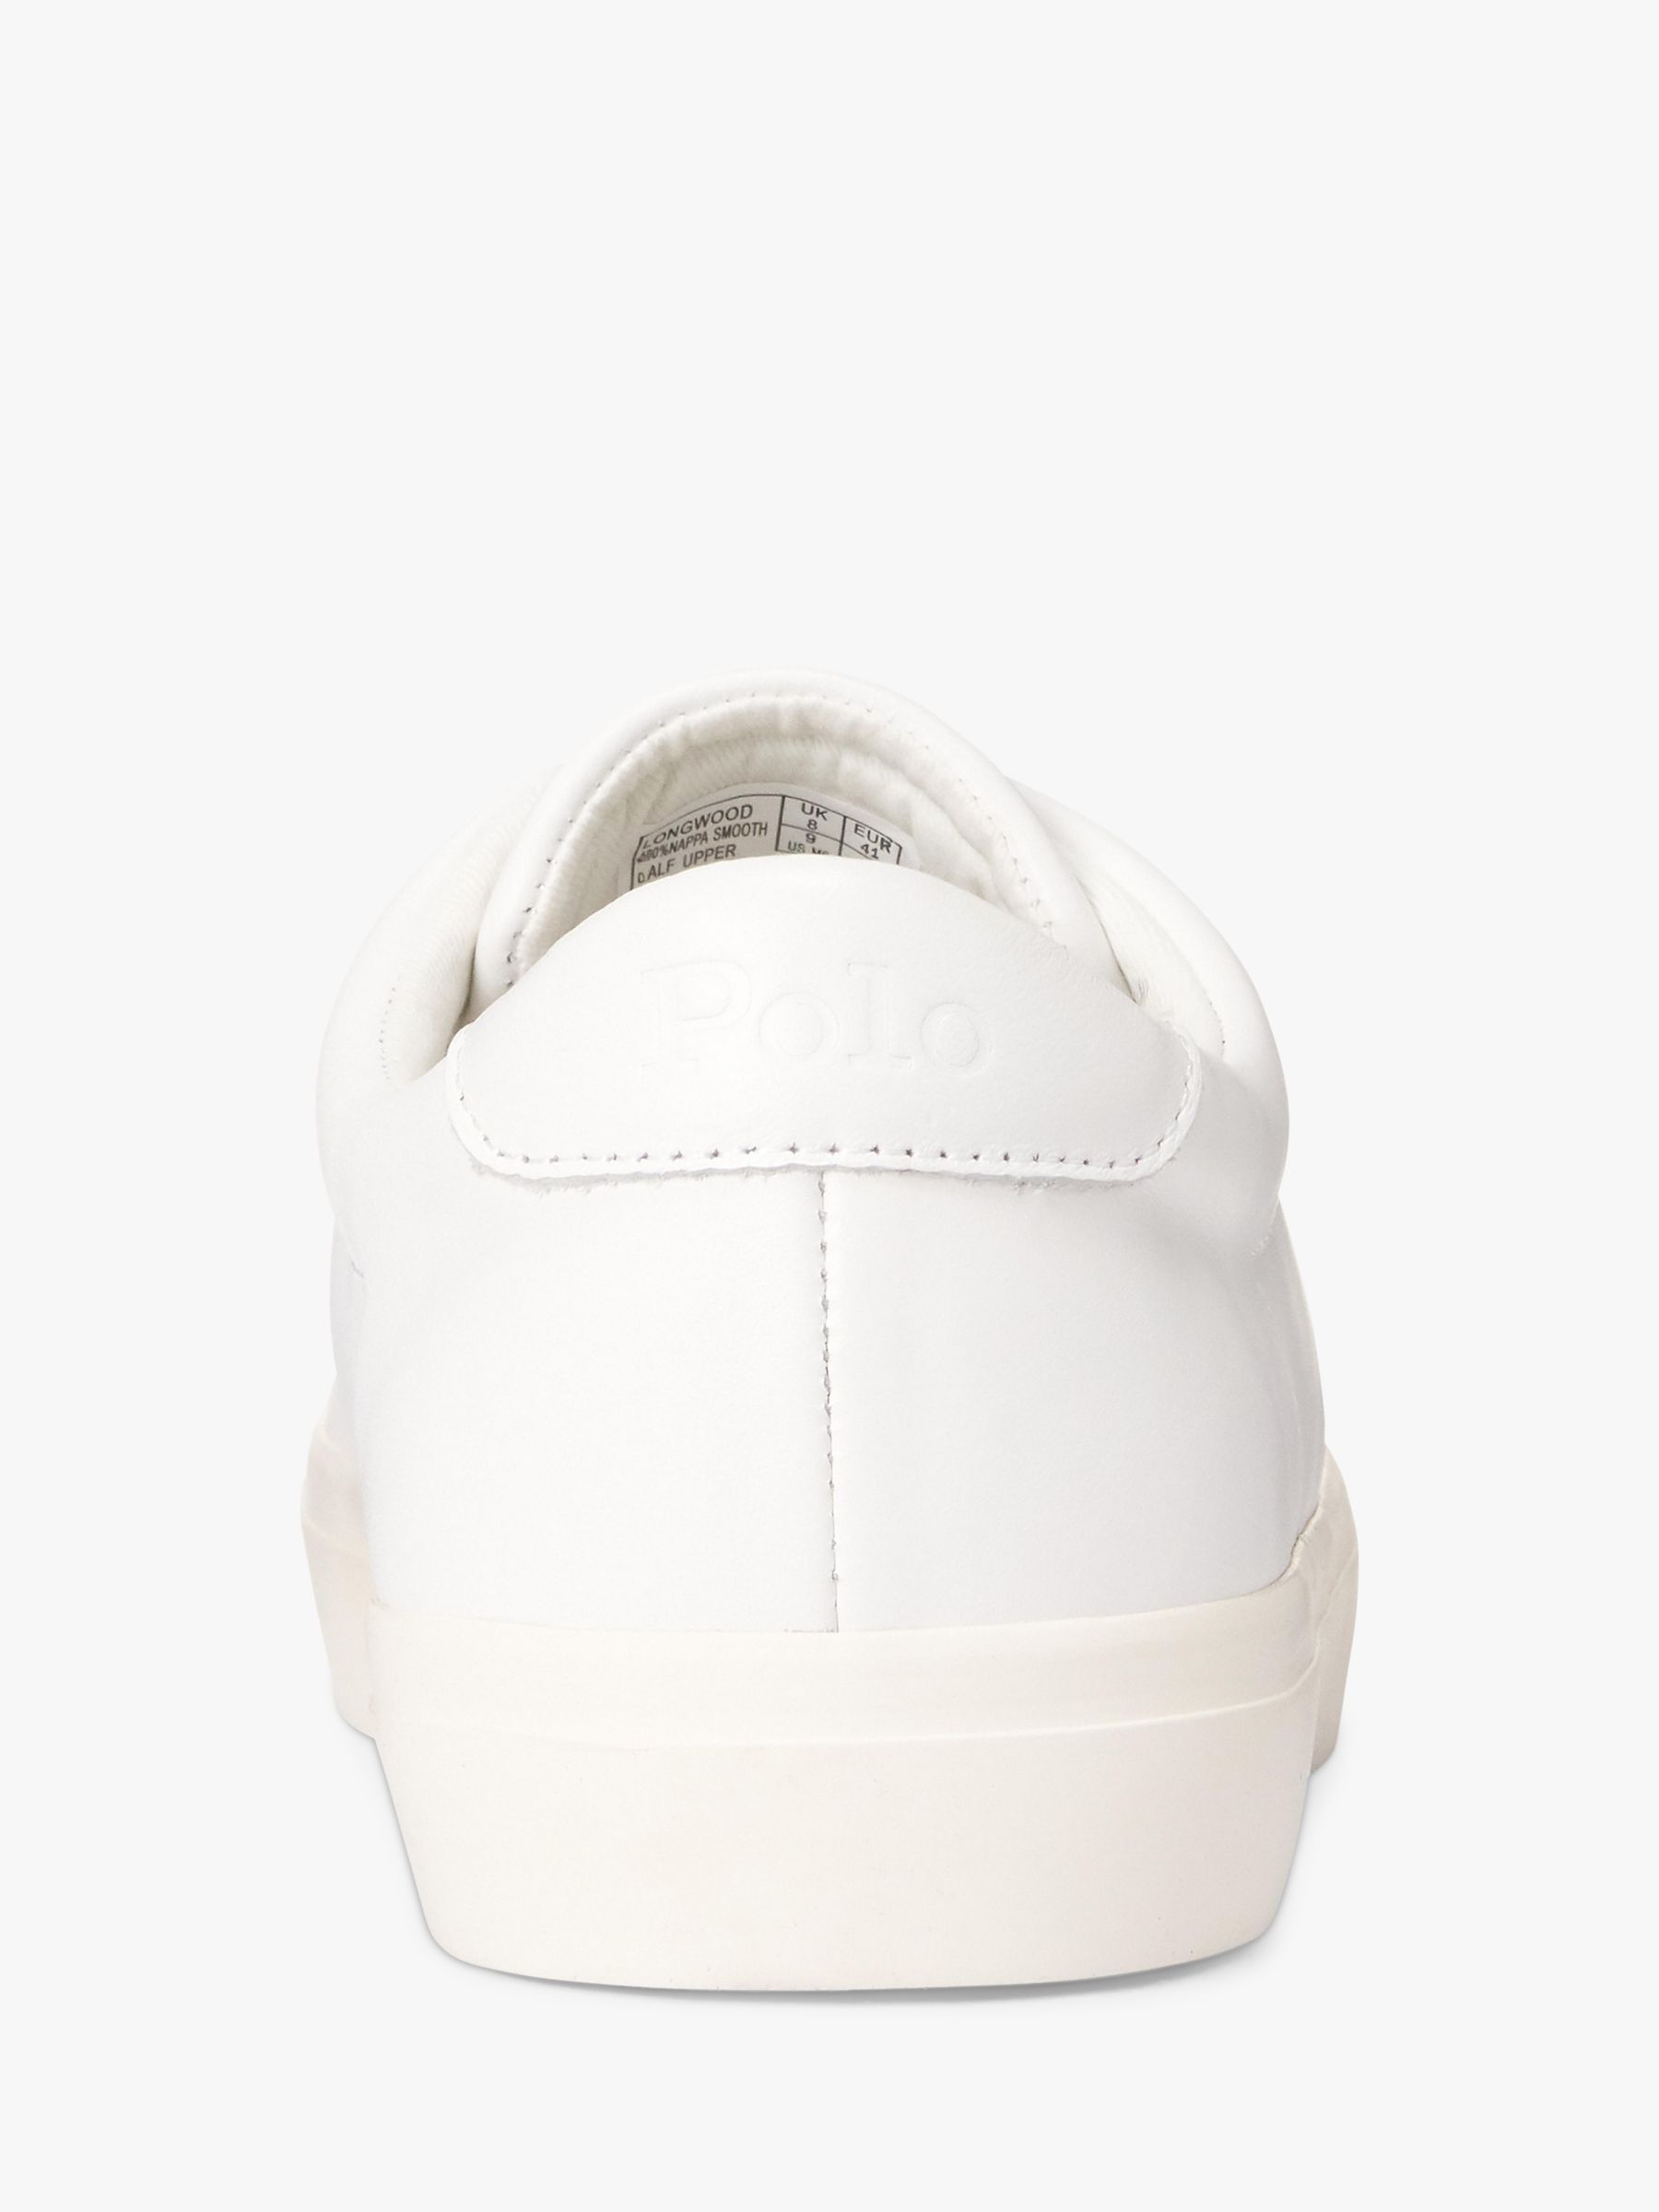 Polo Ralph Lauren Longwood Leather Trainers, White at John Lewis & Partners